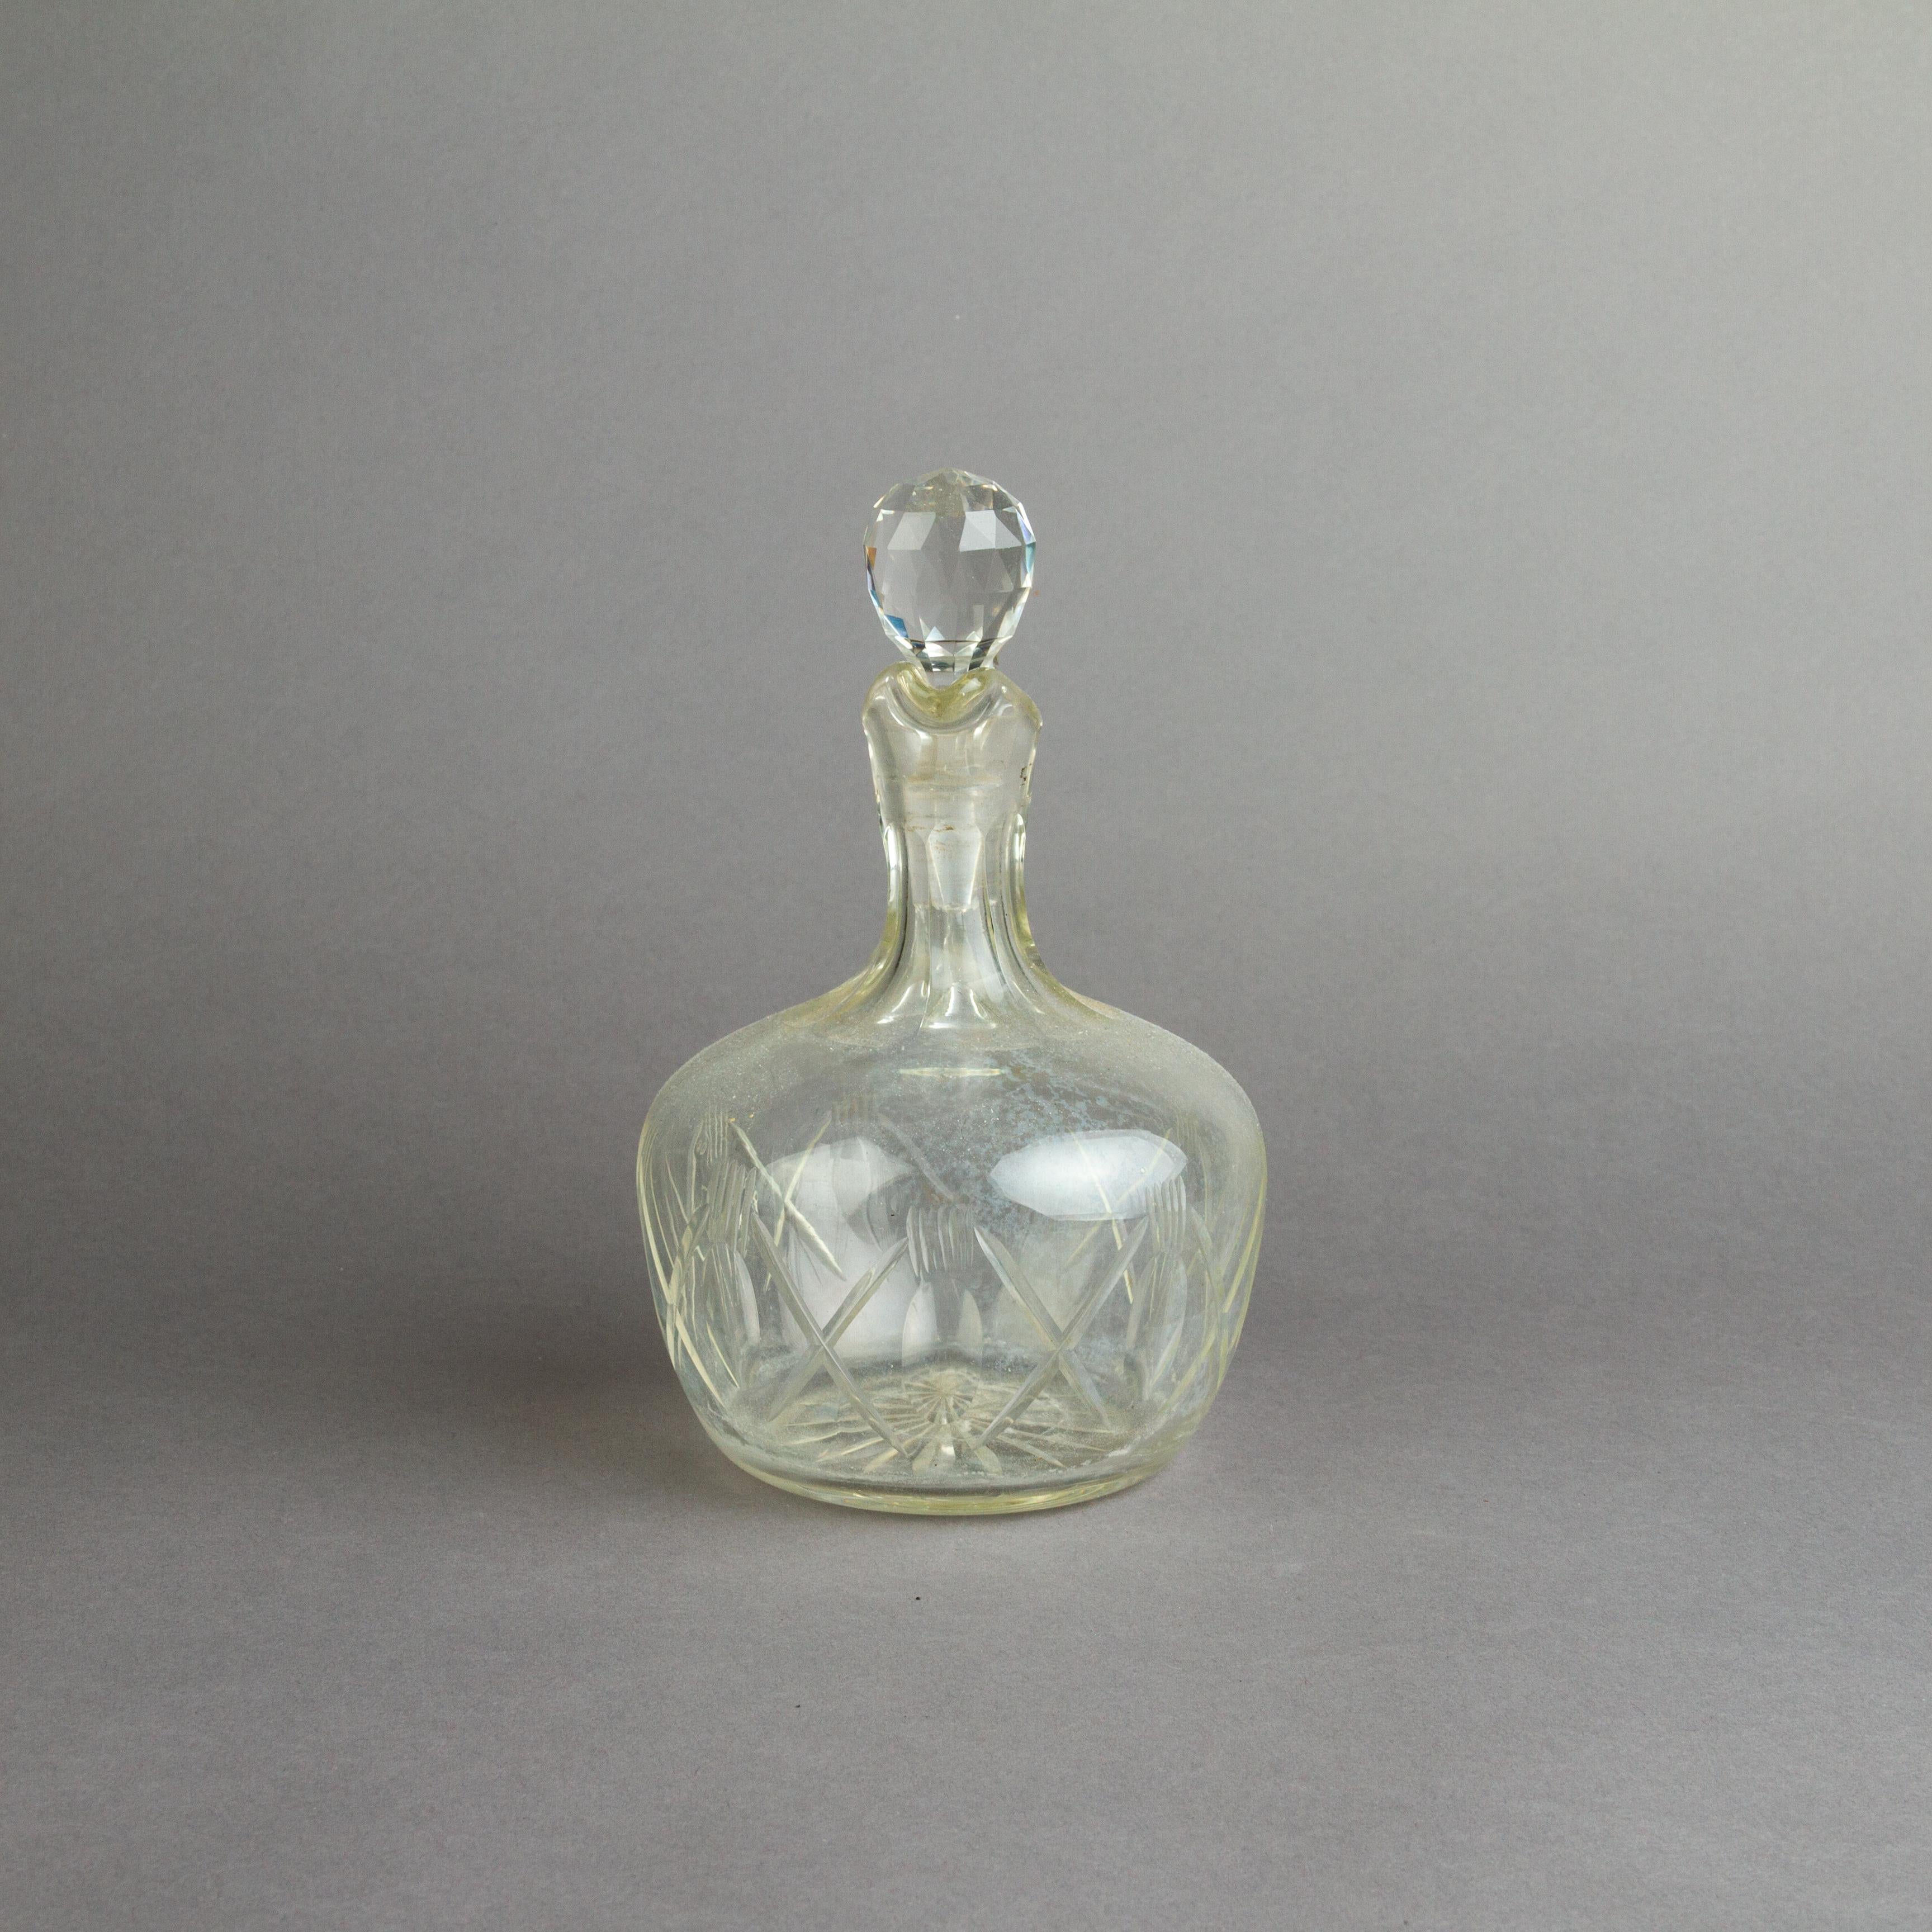 Victorian Cut Crystal Glass Wine Decanter 
Good condition
Free international shipping.